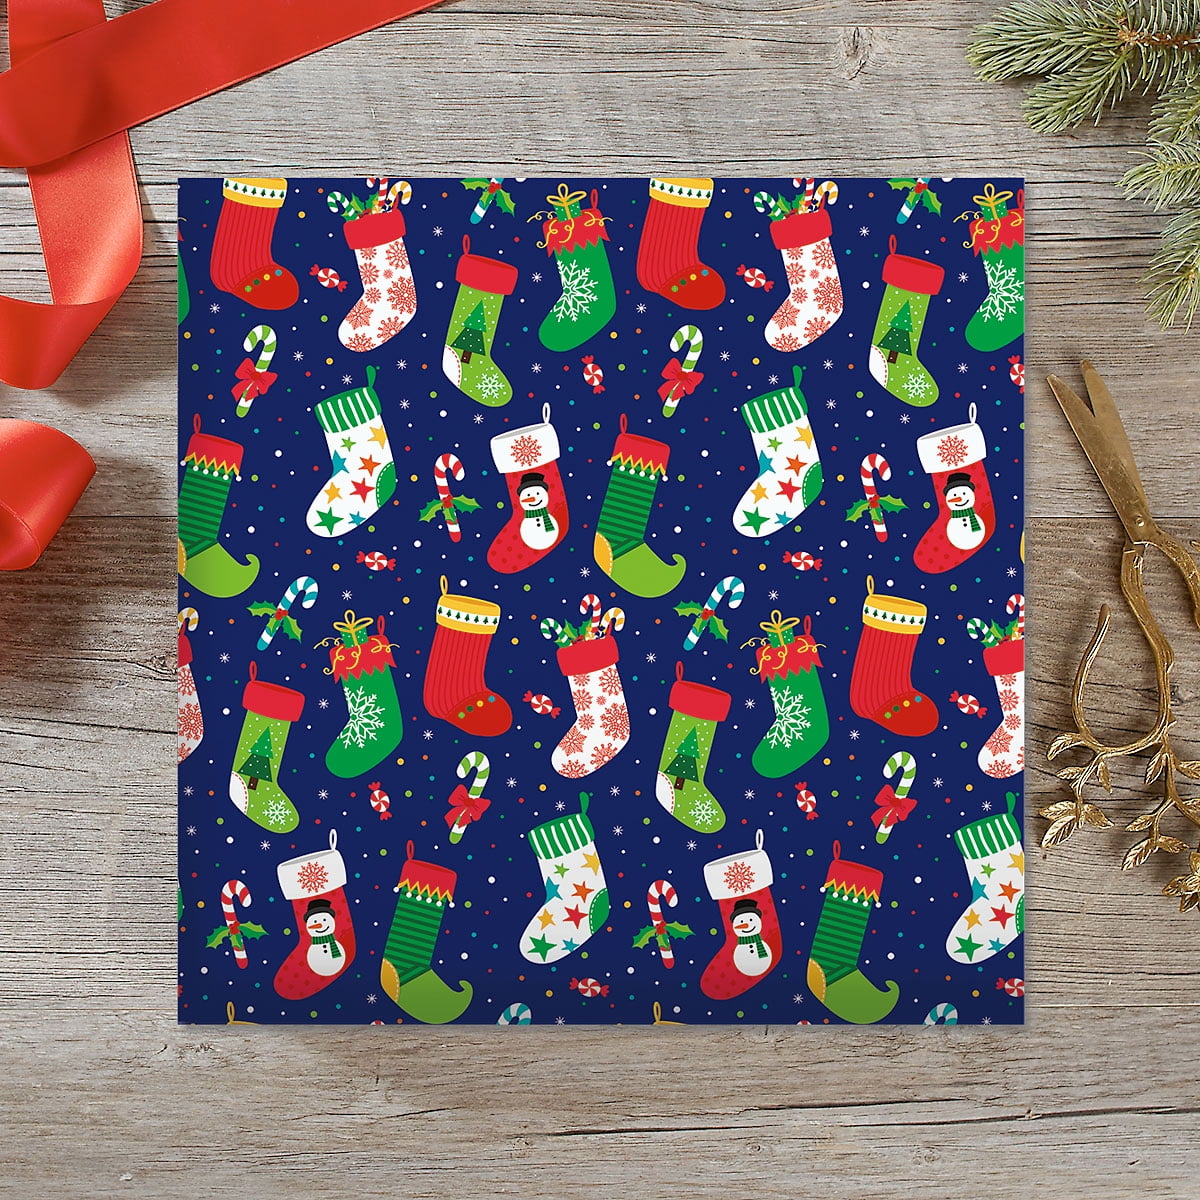 Winter Friends Christmas Rolled Gift Wrap - 1 Giant Roll, 23 Inches x 32  Feet (61 Square Feet Total), Heavyweight, Tear-Resistant, Holiday Wrapping  Paper 